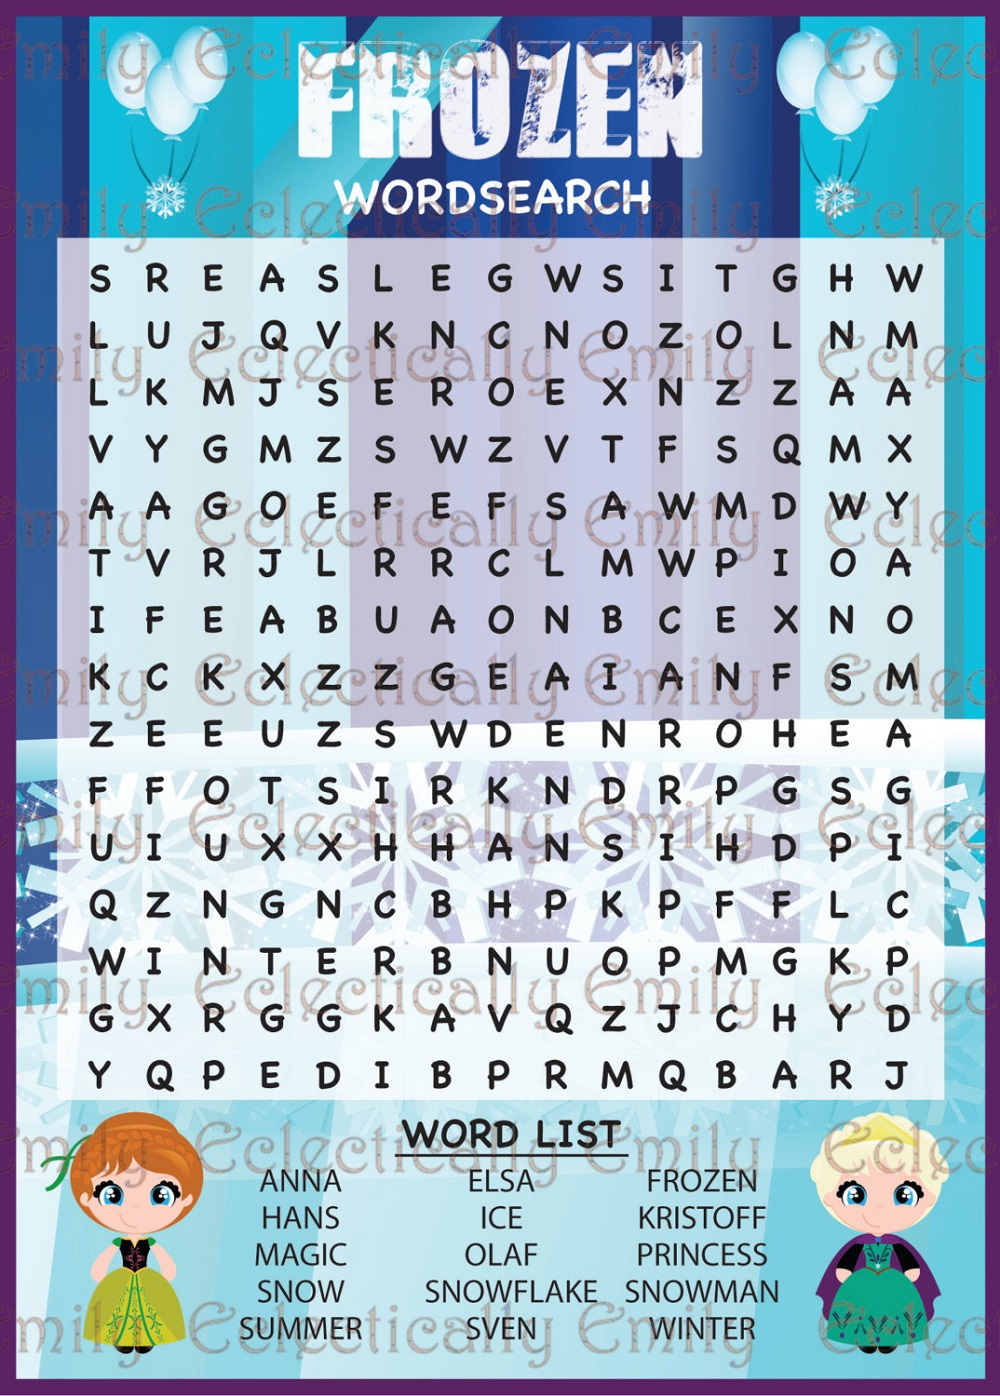 Disney Word Searches For Animation Fans | 101 Printable with regard to Disney Word Searches Printable